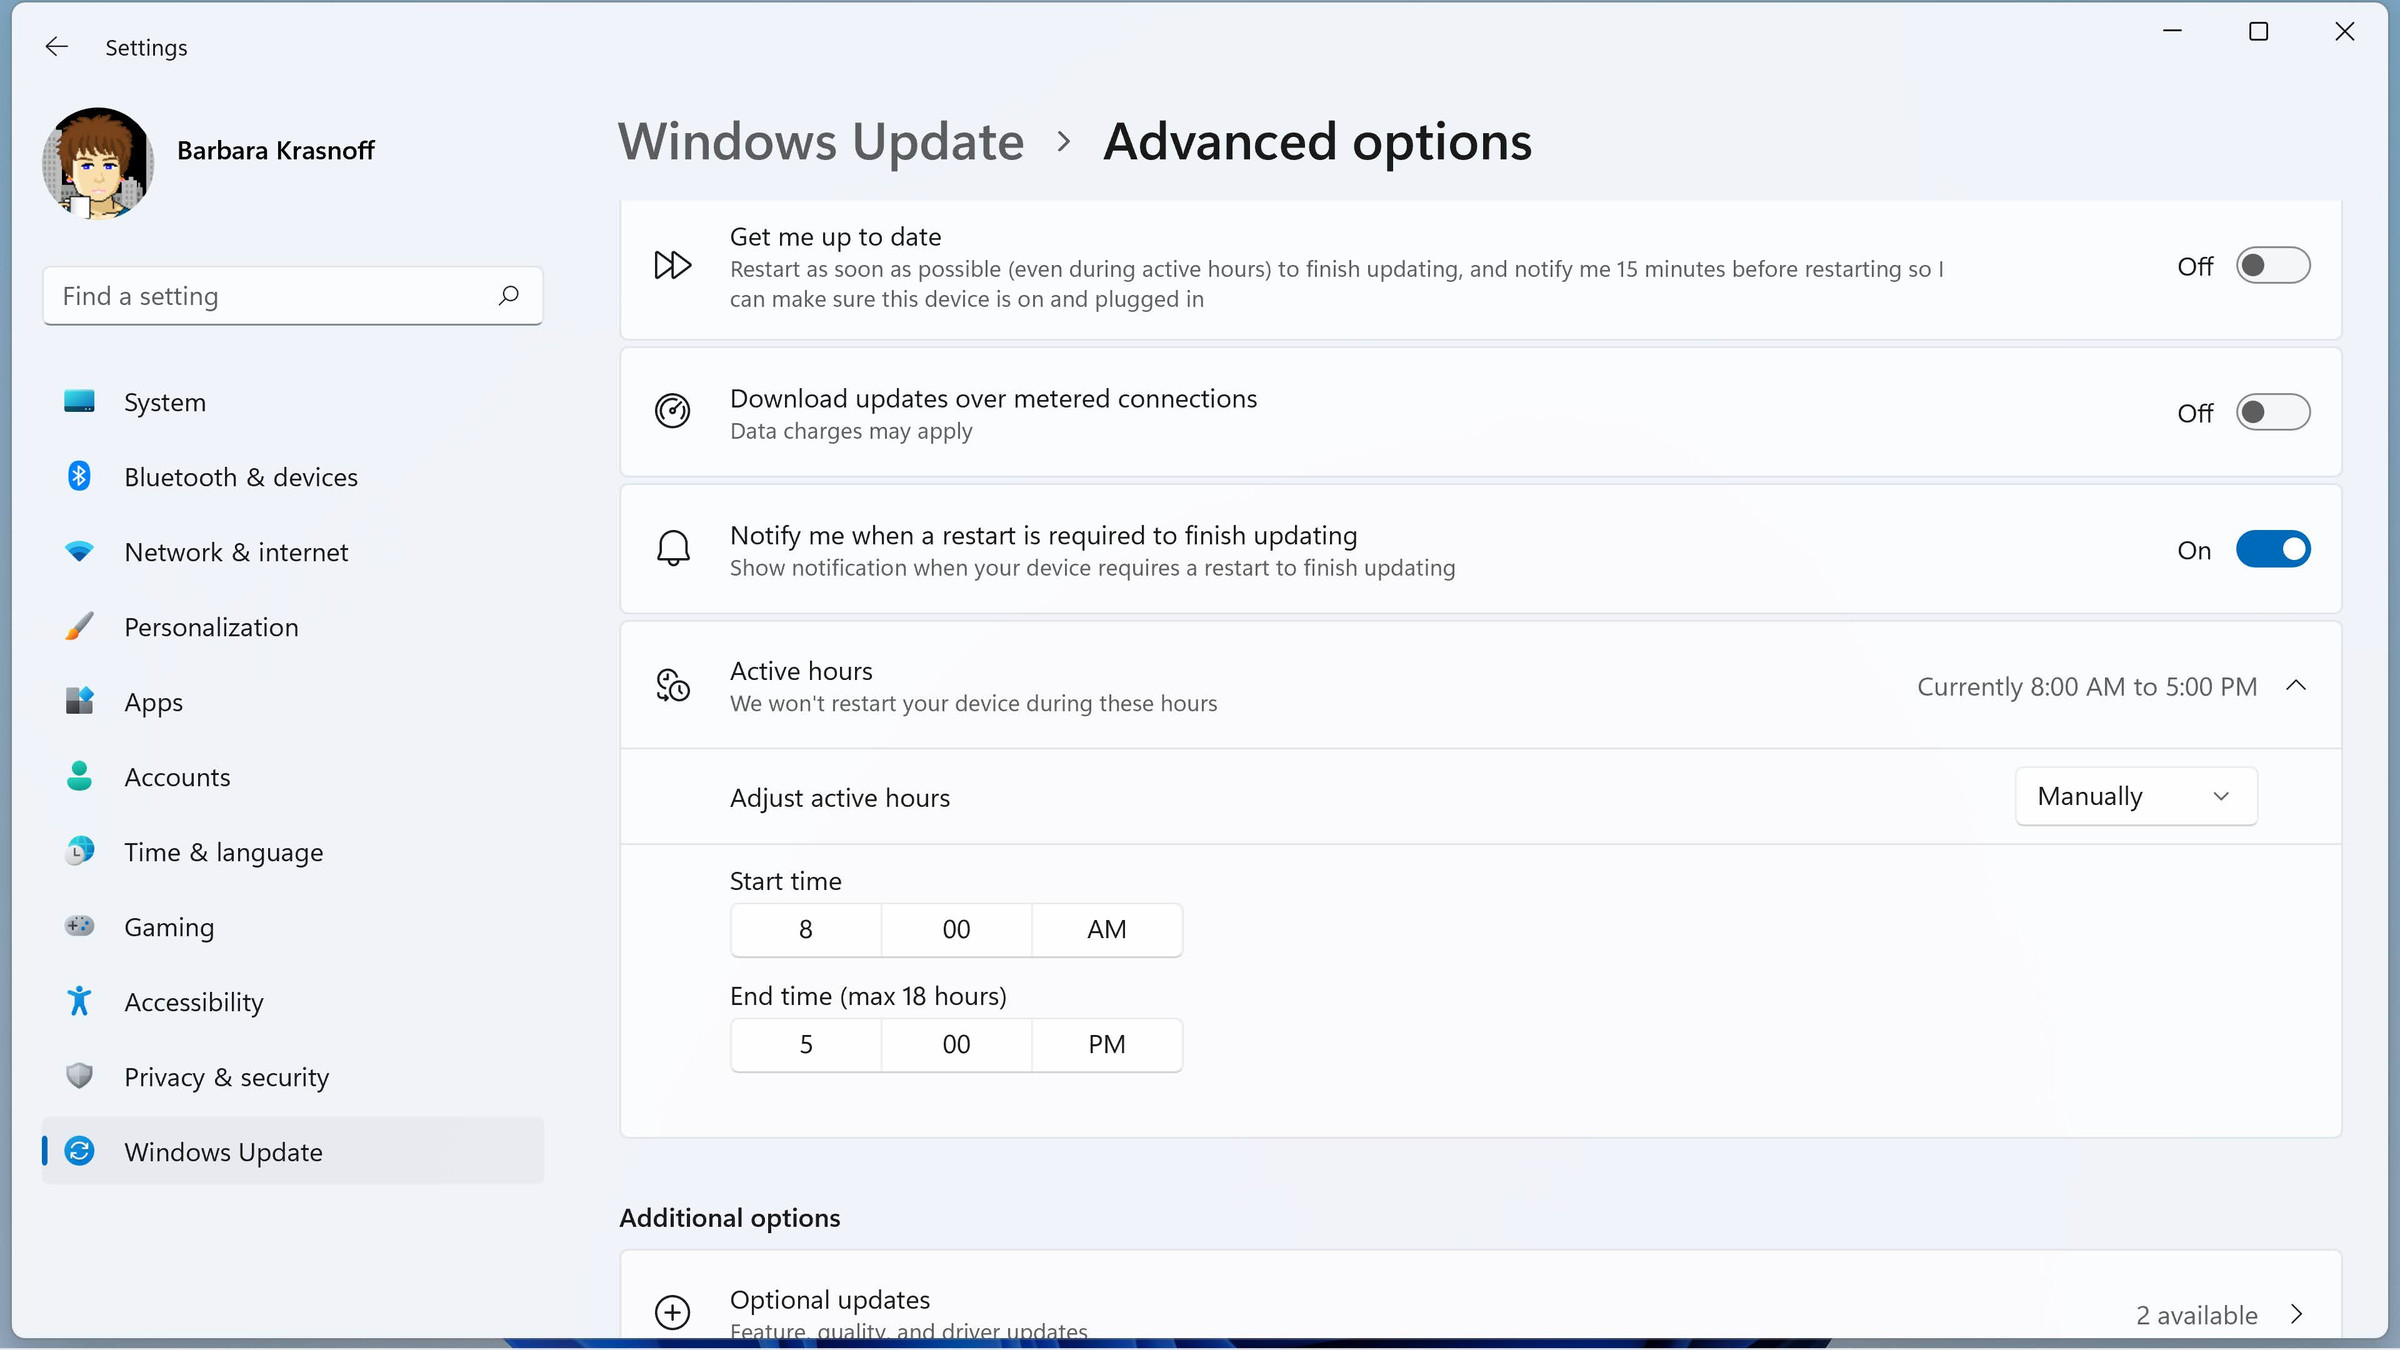 Advanced options lets you tweak your update settings.